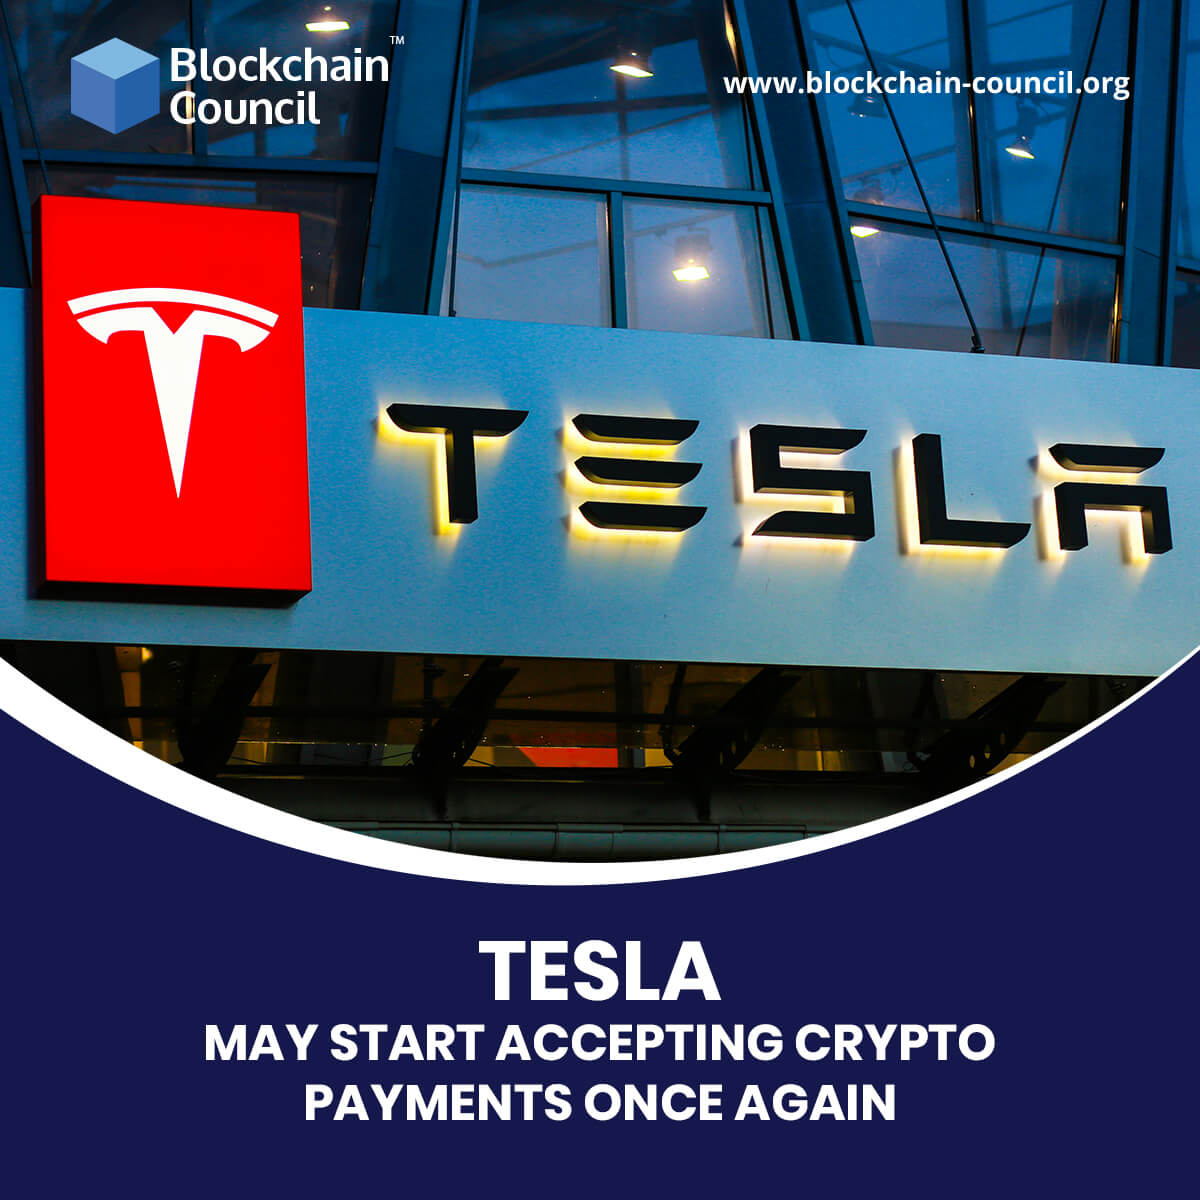 Tesla may start accepting crypto payments once again